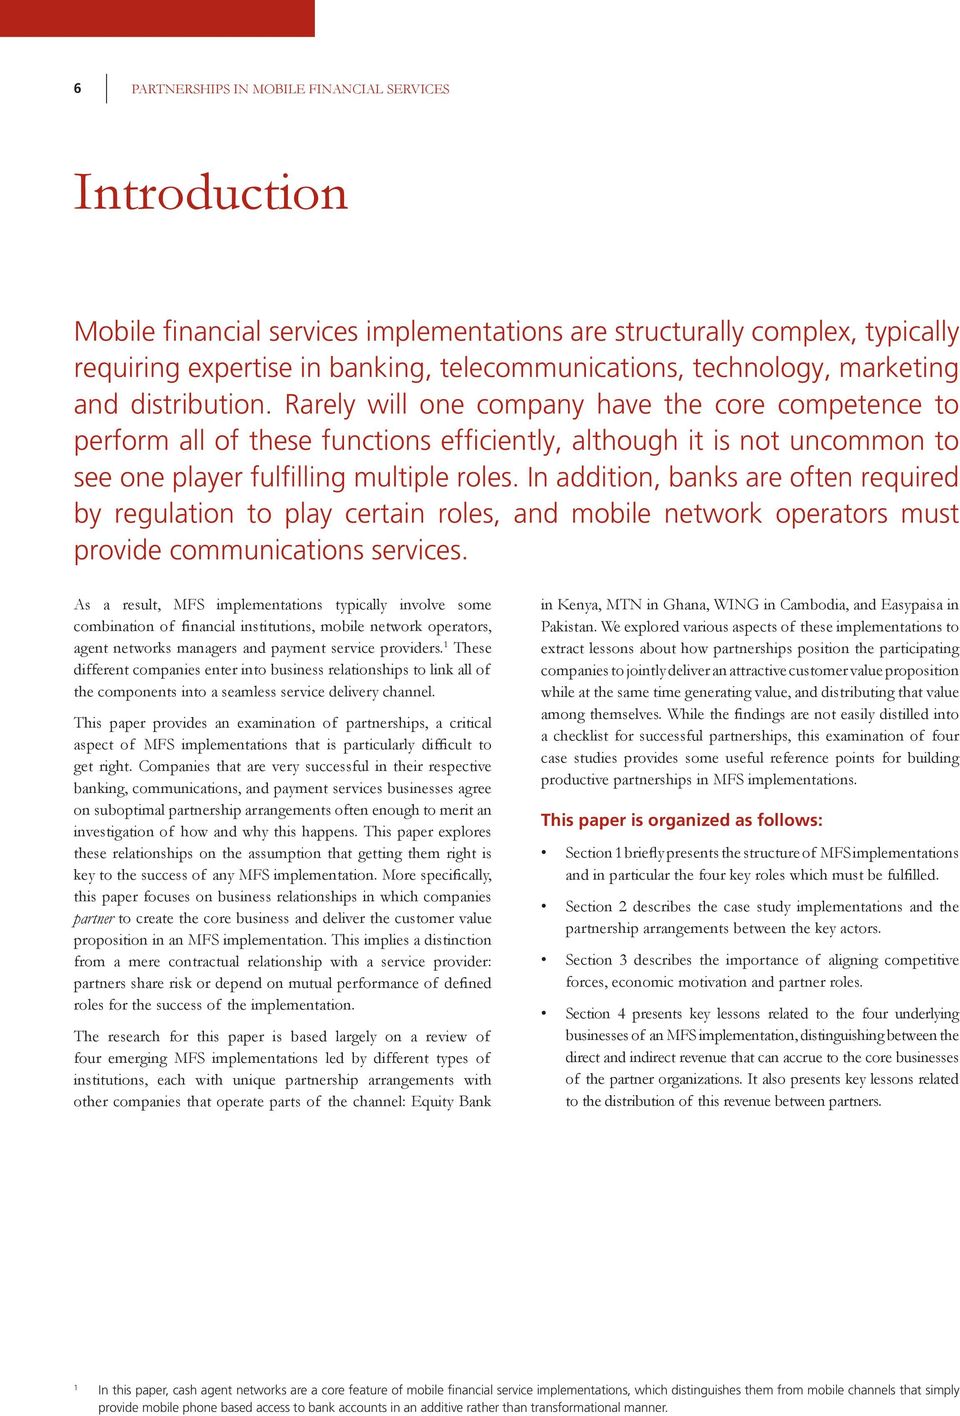 In addition, banks are often required by regulation to play certain roles, and mobile network operators must provide communications services.